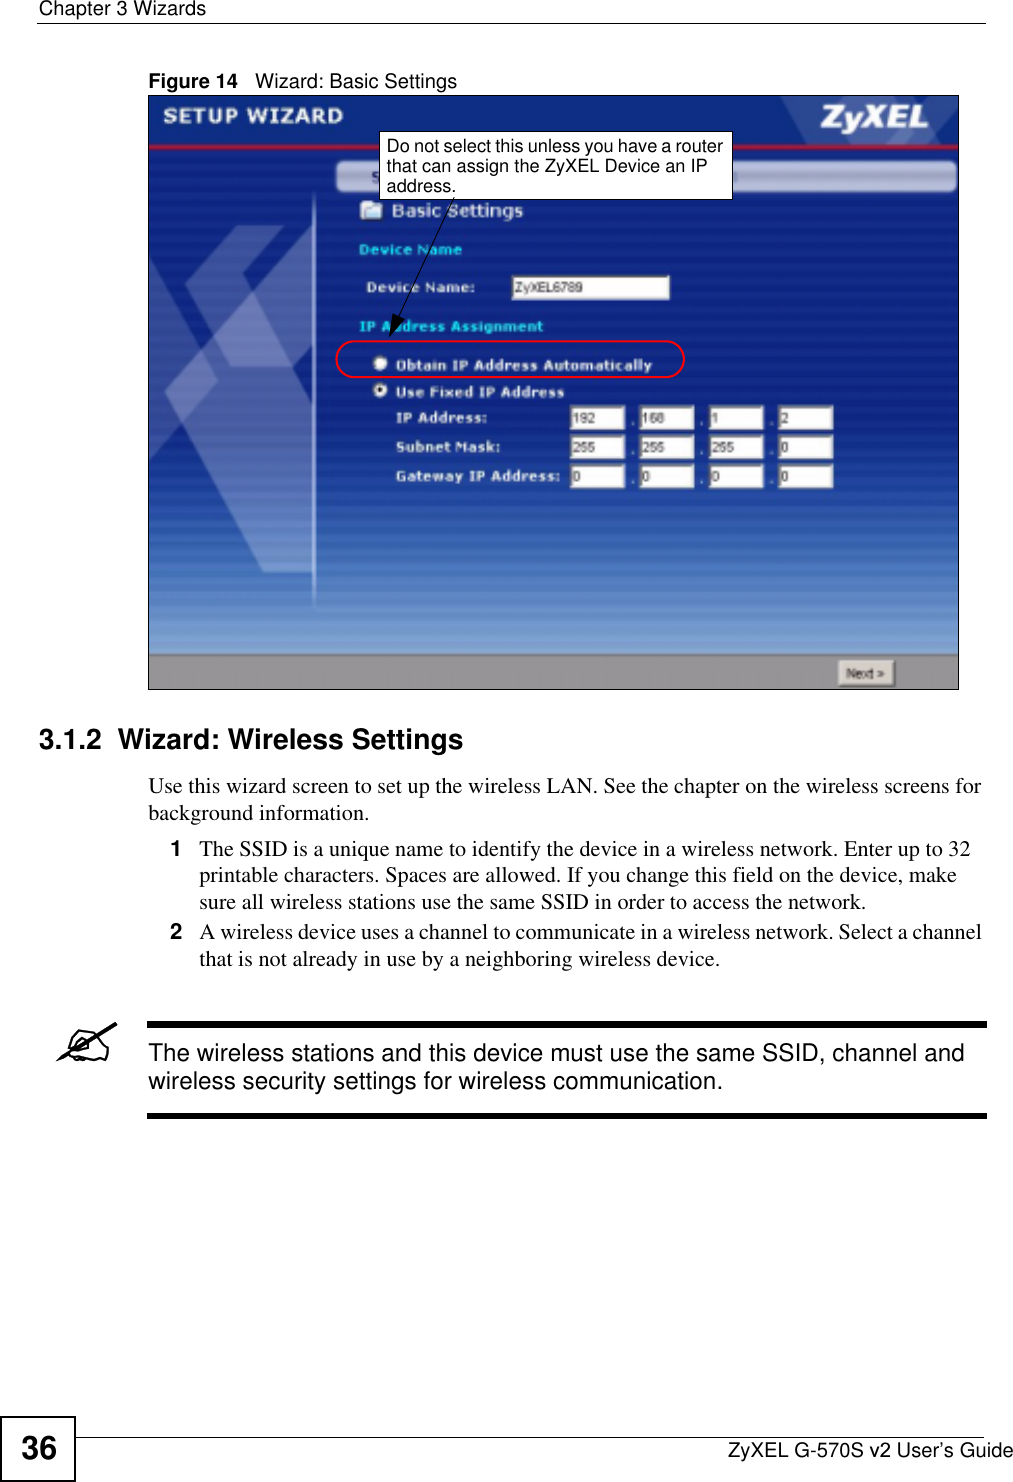 Chapter 3 WizardsZyXEL G-570S v2 User’s Guide36Figure 14   Wizard: Basic Settings3.1.2  Wizard: Wireless SettingsUse this wizard screen to set up the wireless LAN. See the chapter on the wireless screens for background information.1The SSID is a unique name to identify the device in a wireless network. Enter up to 32 printable characters. Spaces are allowed. If you change this field on the device, make sure all wireless stations use the same SSID in order to access the network.2A wireless device uses a channel to communicate in a wireless network. Select a channel that is not already in use by a neighboring wireless device.&quot;The wireless stations and this device must use the same SSID, channel and wireless security settings for wireless communication.Do not select this unless you have a router that can assign the ZyXEL Device an IP address.